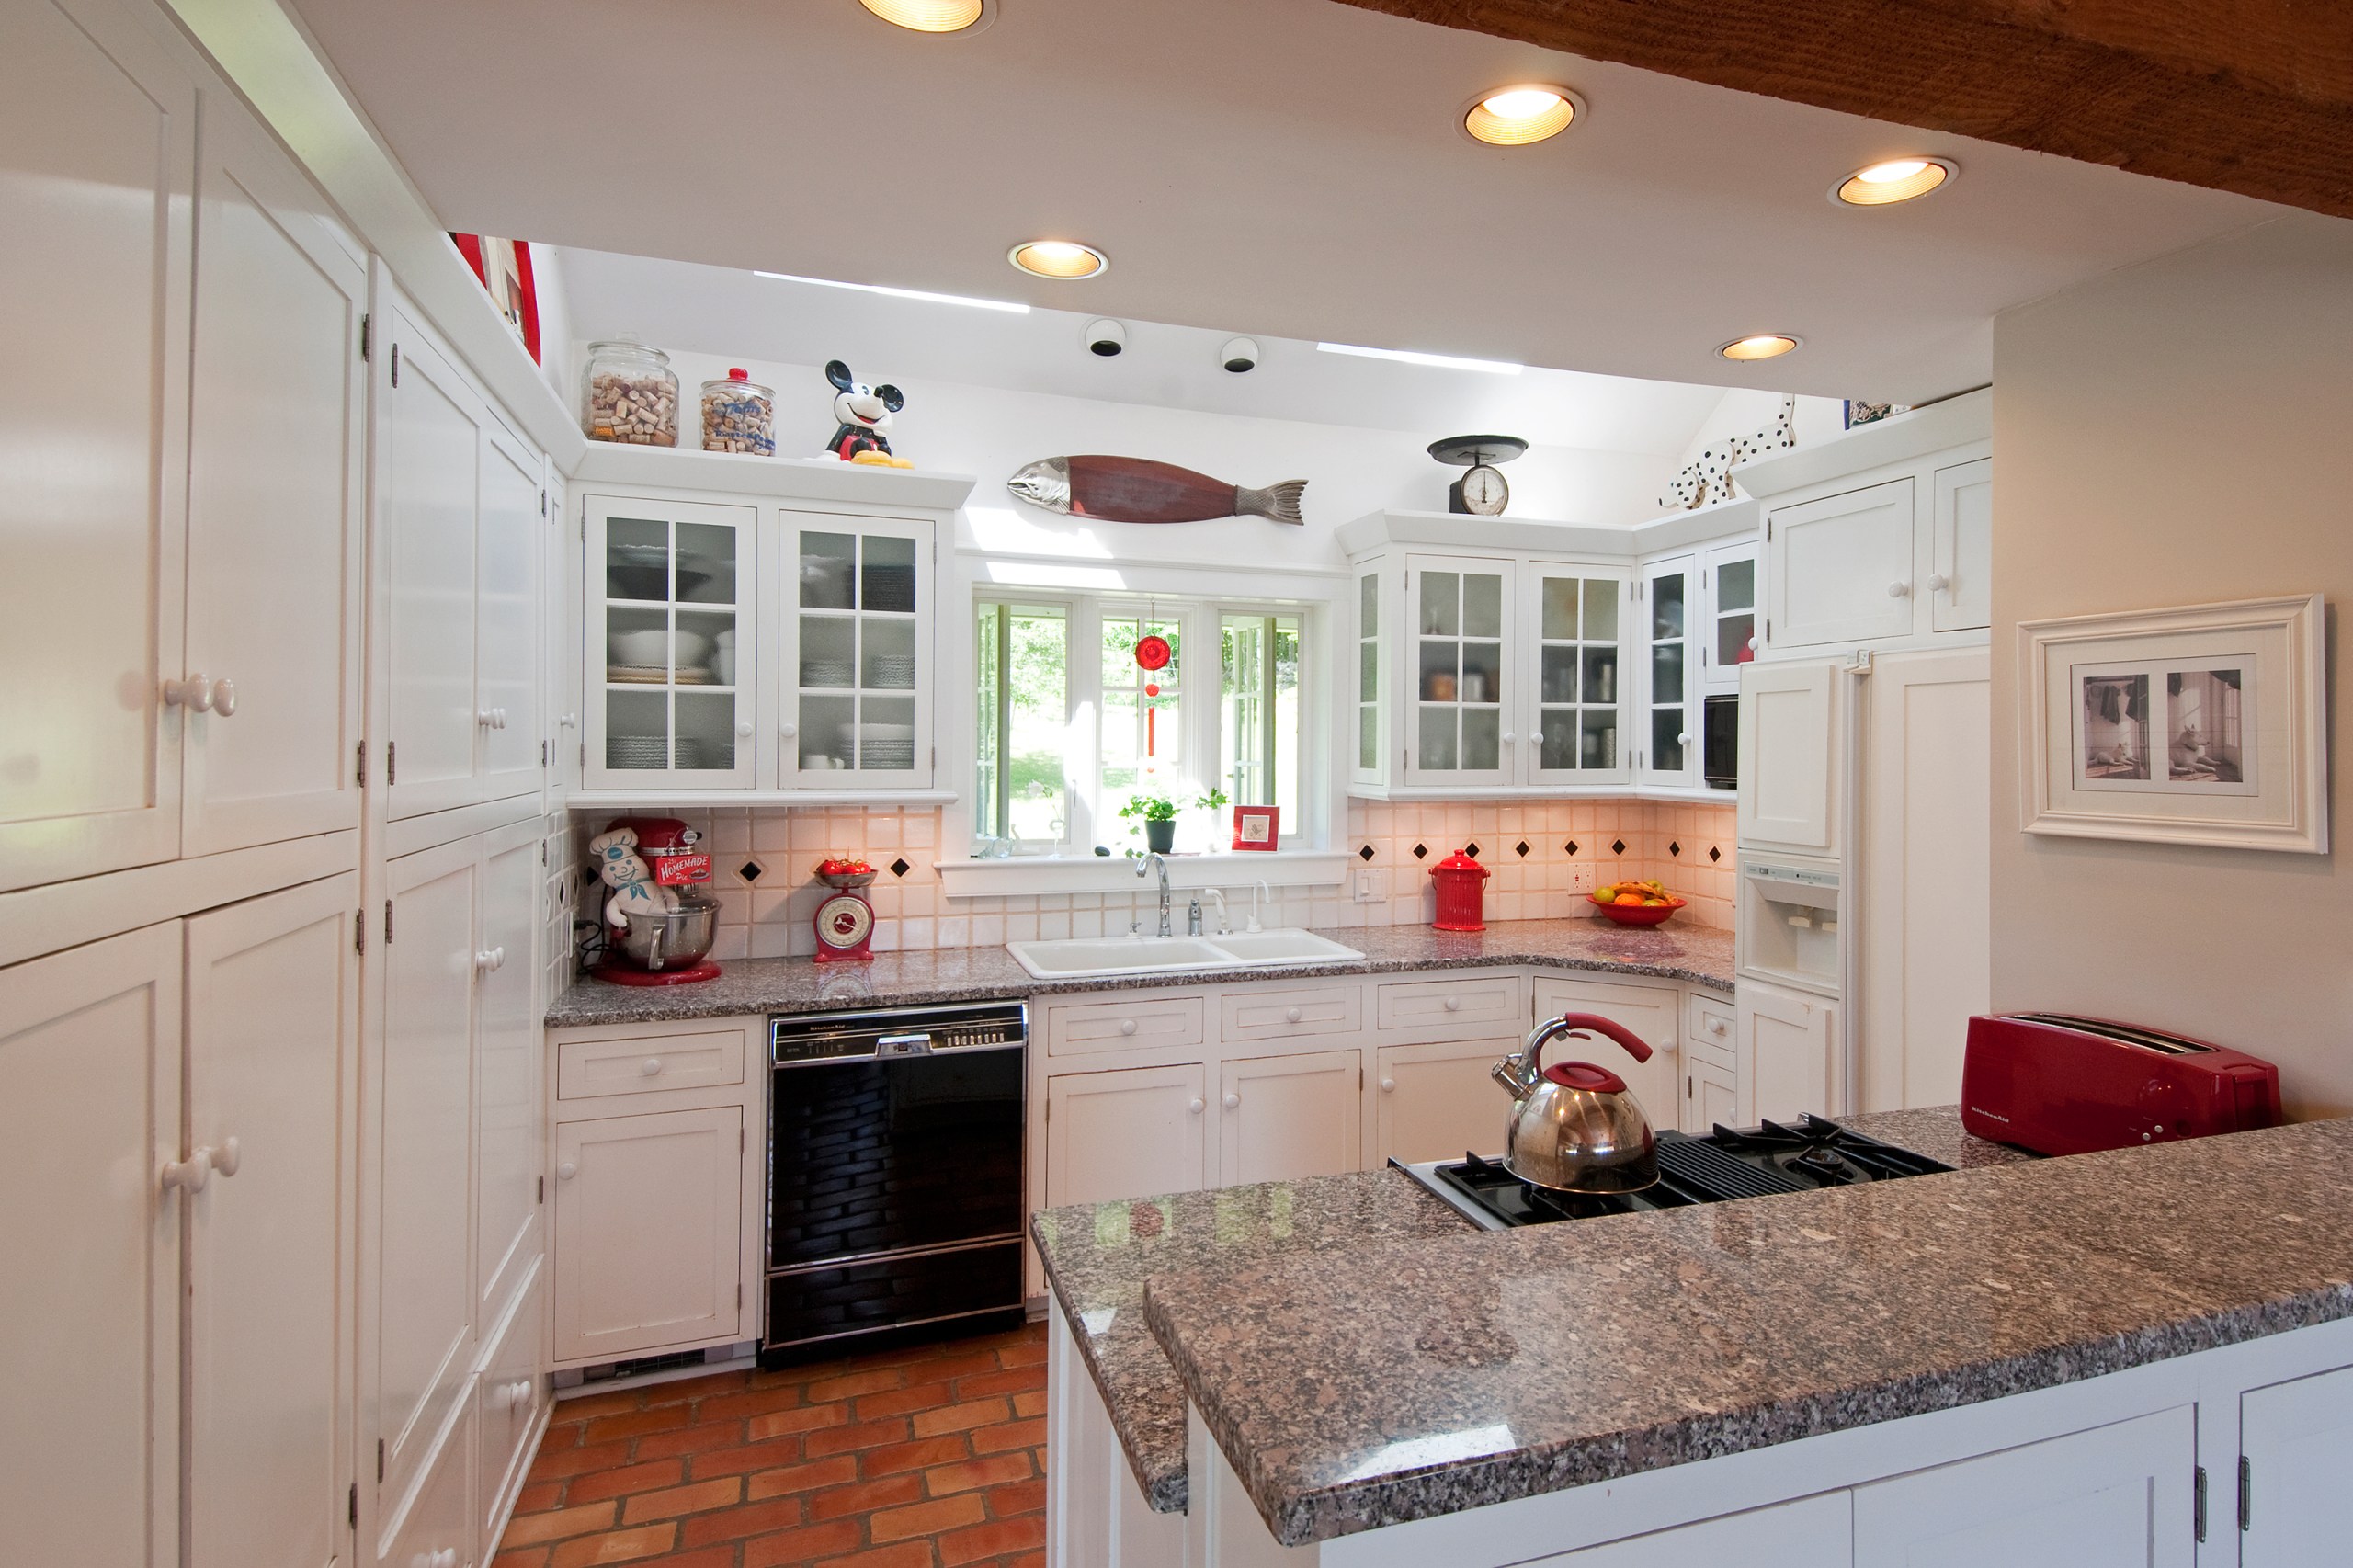 Kitchen Lighting Design | Kitchen Lighting Design Guidelines